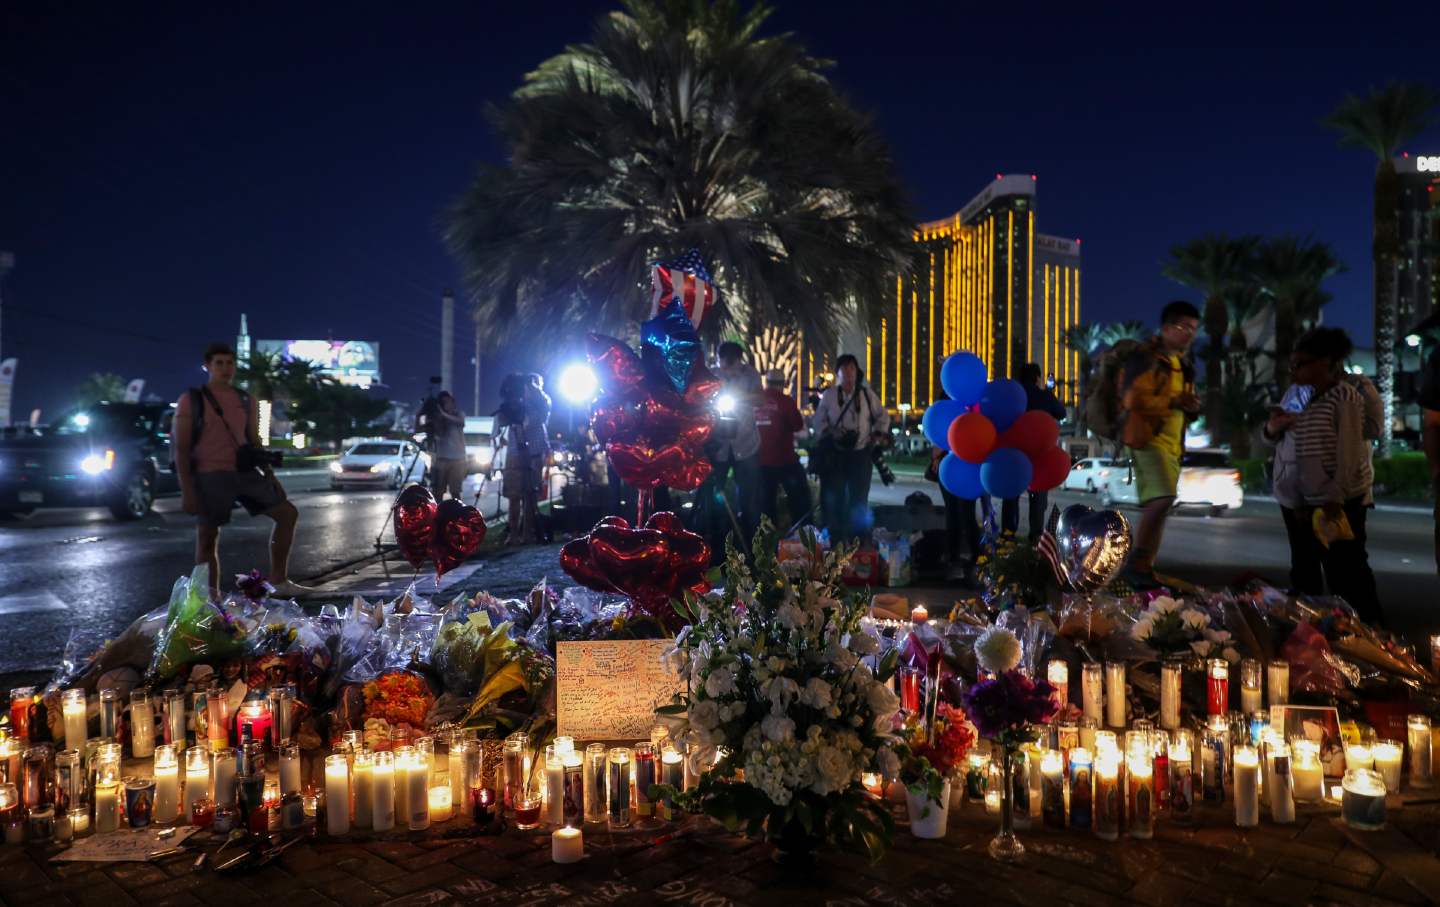 A makeshift memorial for the victims of the Las Vegas mass shooting who were killed when a gunman opened fire on them in October 2017